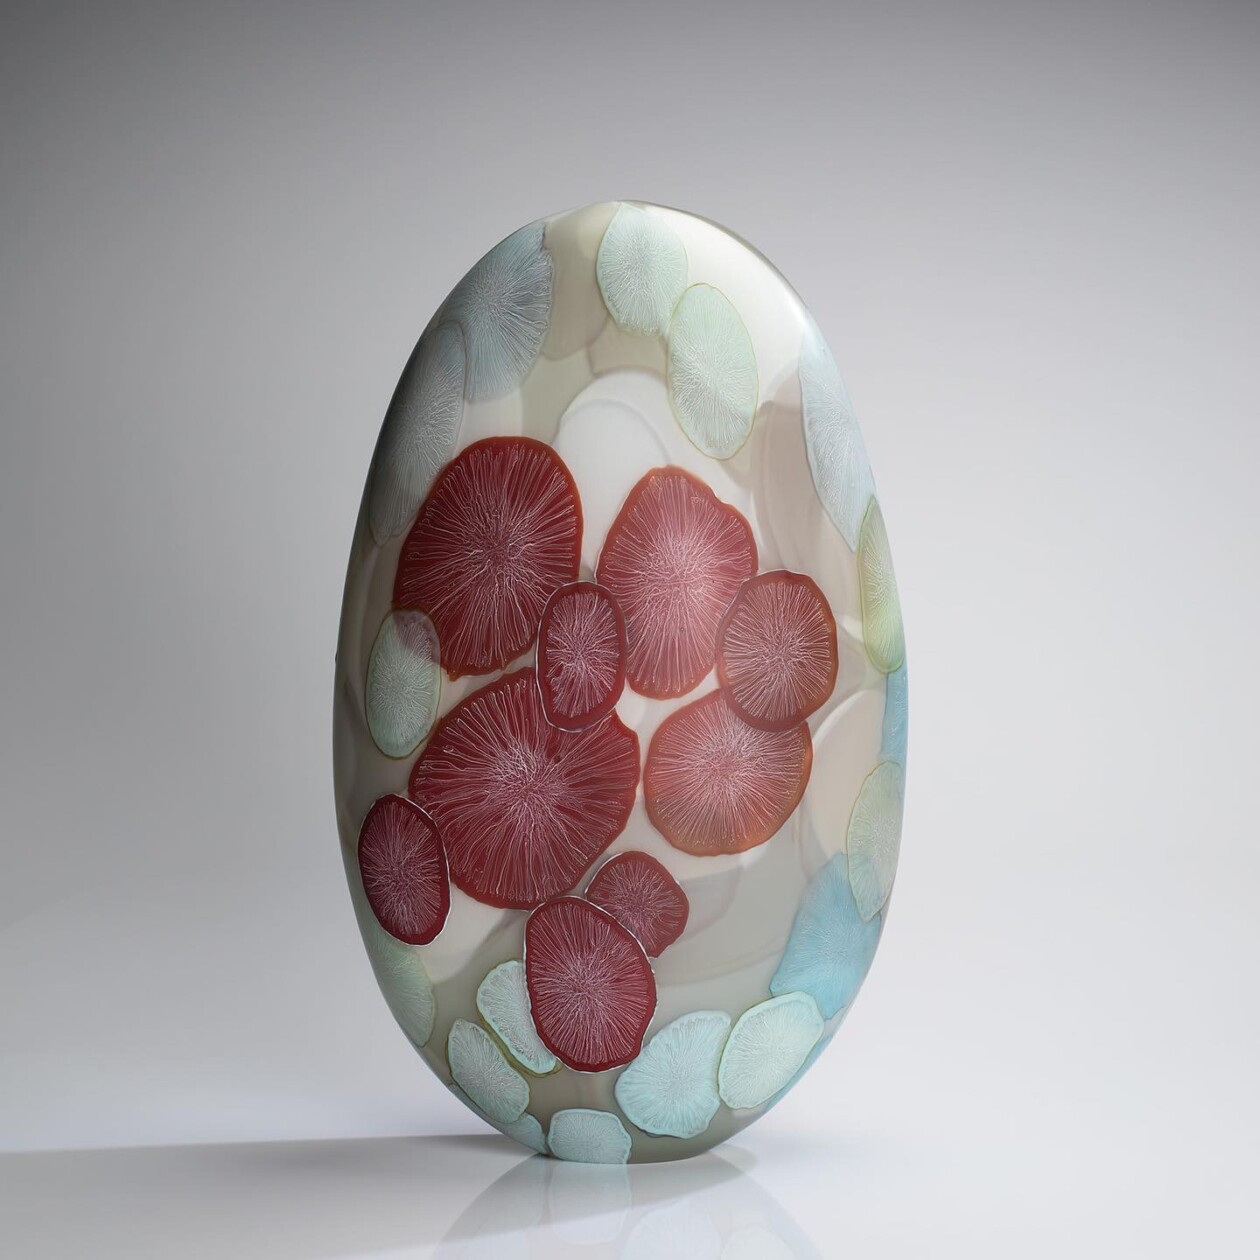 Beautiful And Innovative Abstract Glass Sculptures By Clare Belfrage (6)